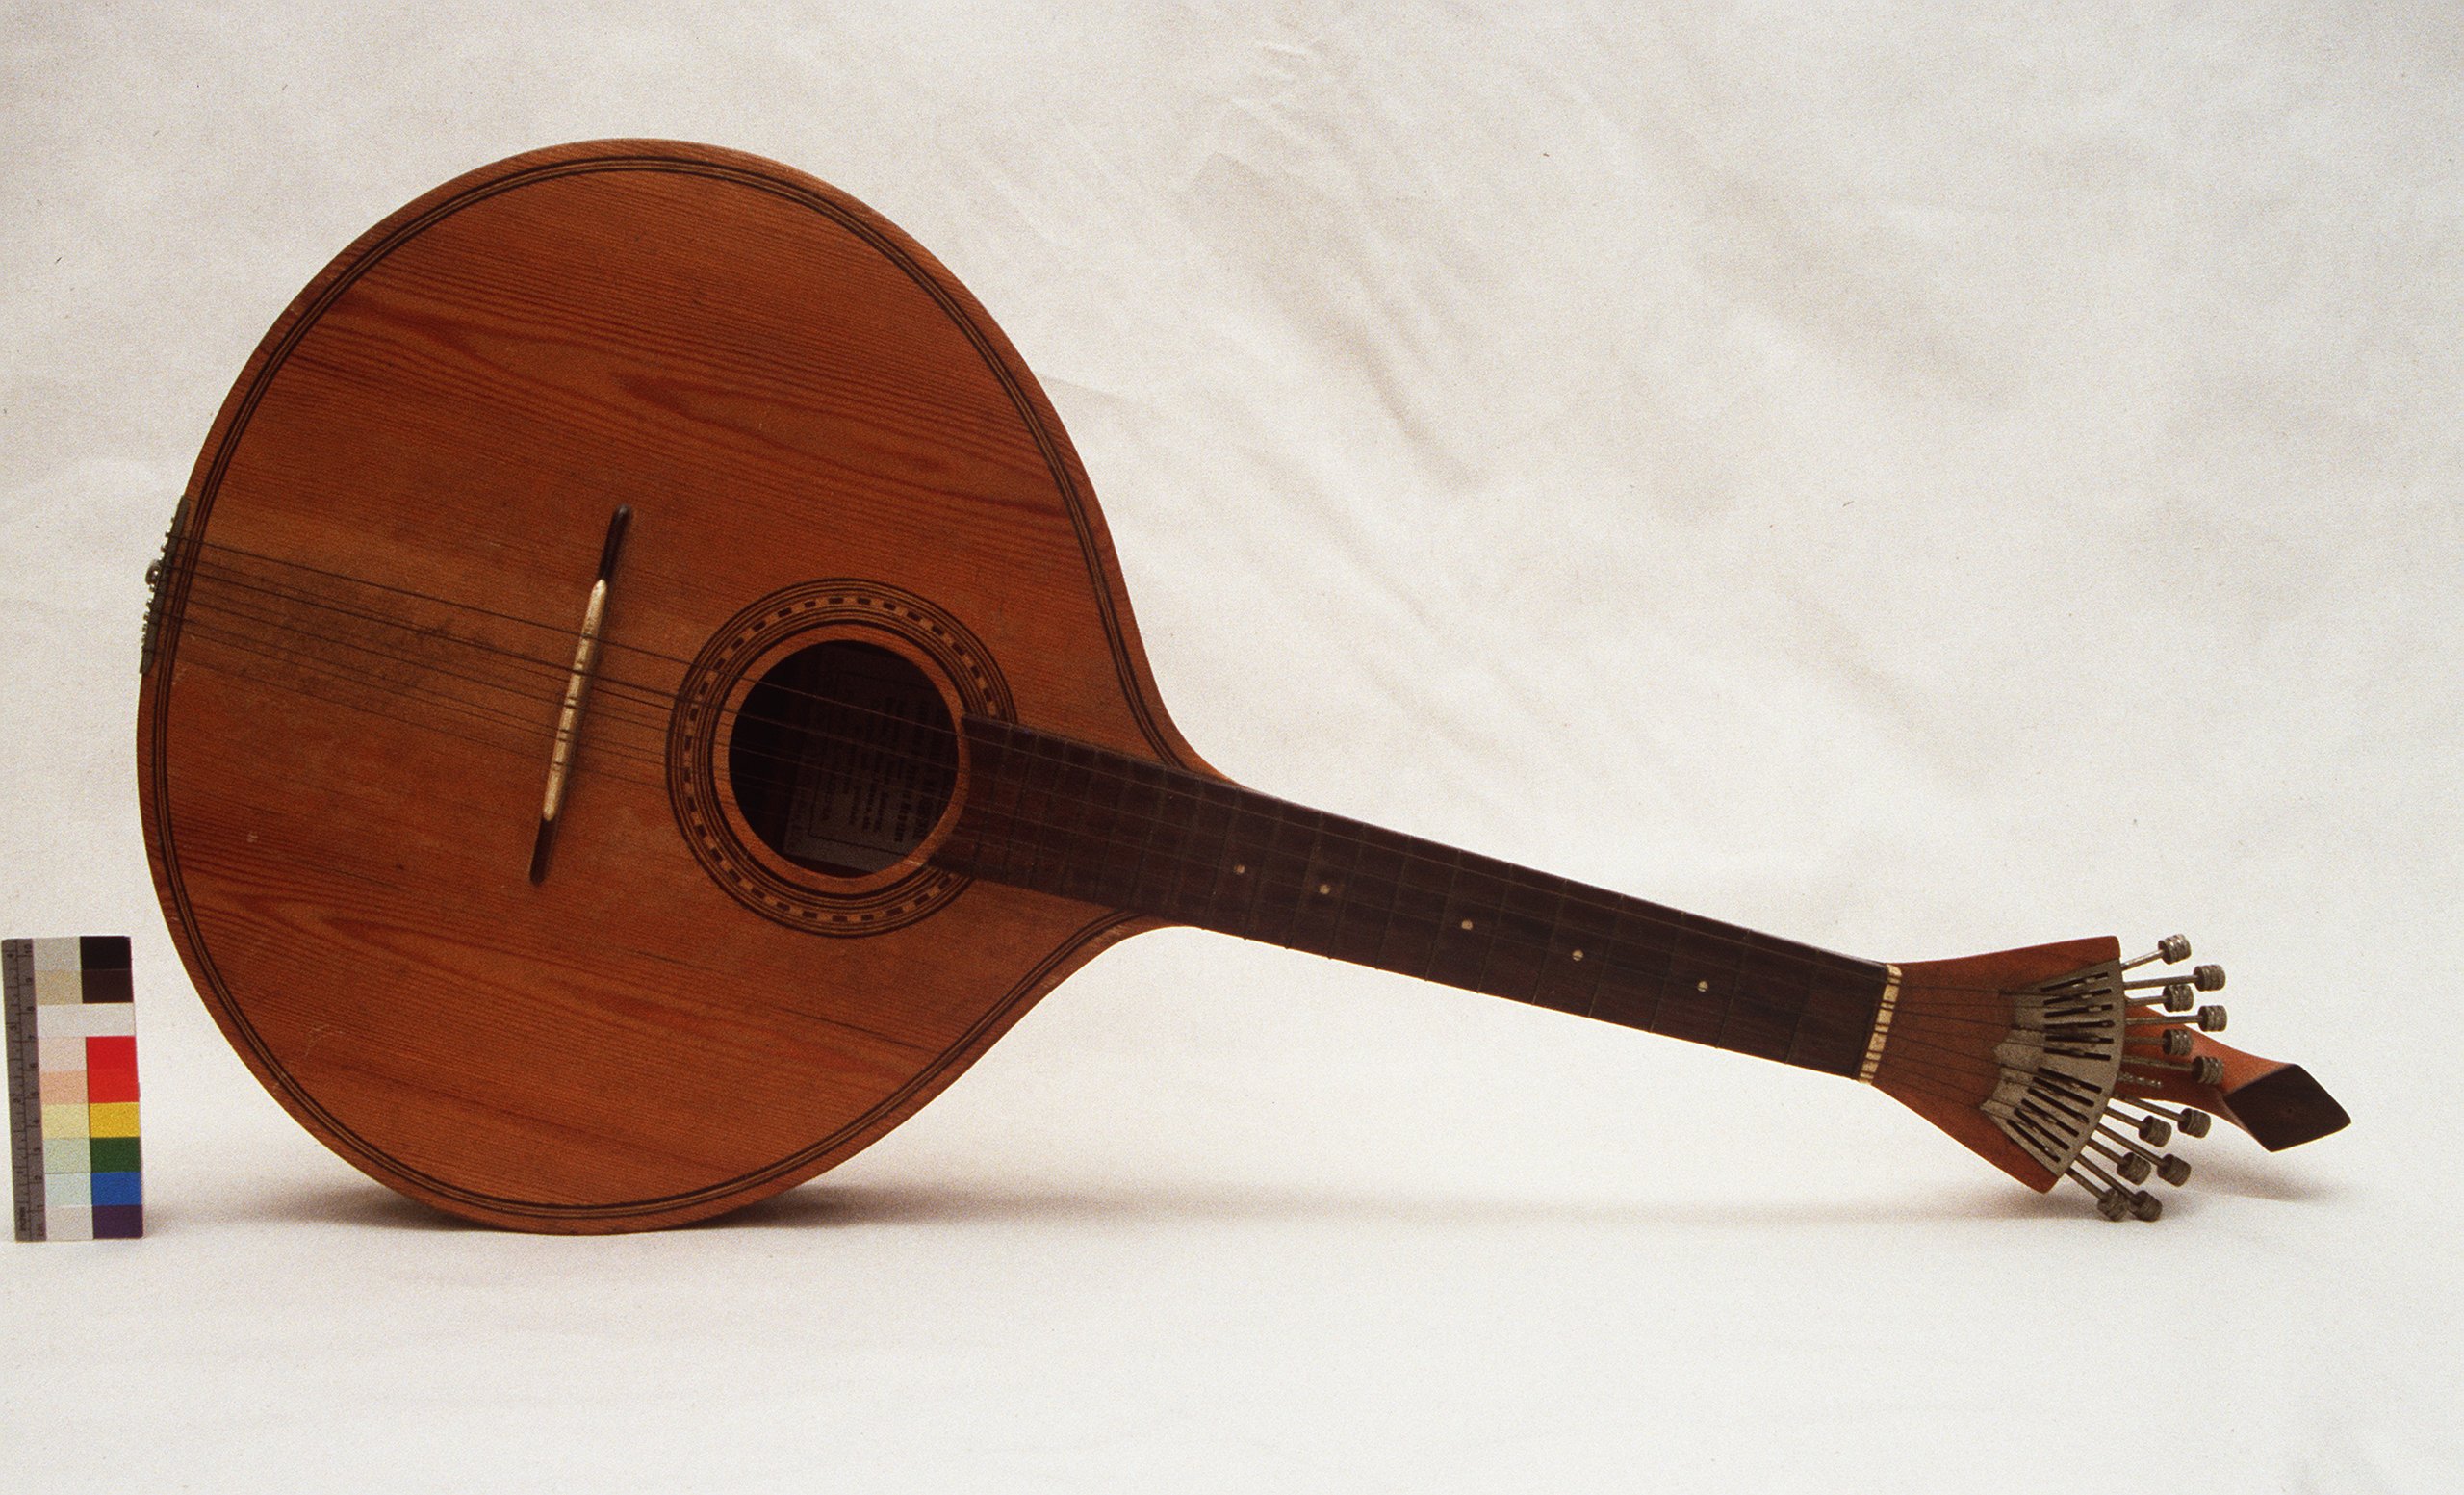 Powerhouse Collection - Cavaco Portuguese guitar used by the Jandaschewsky  family musical clowns